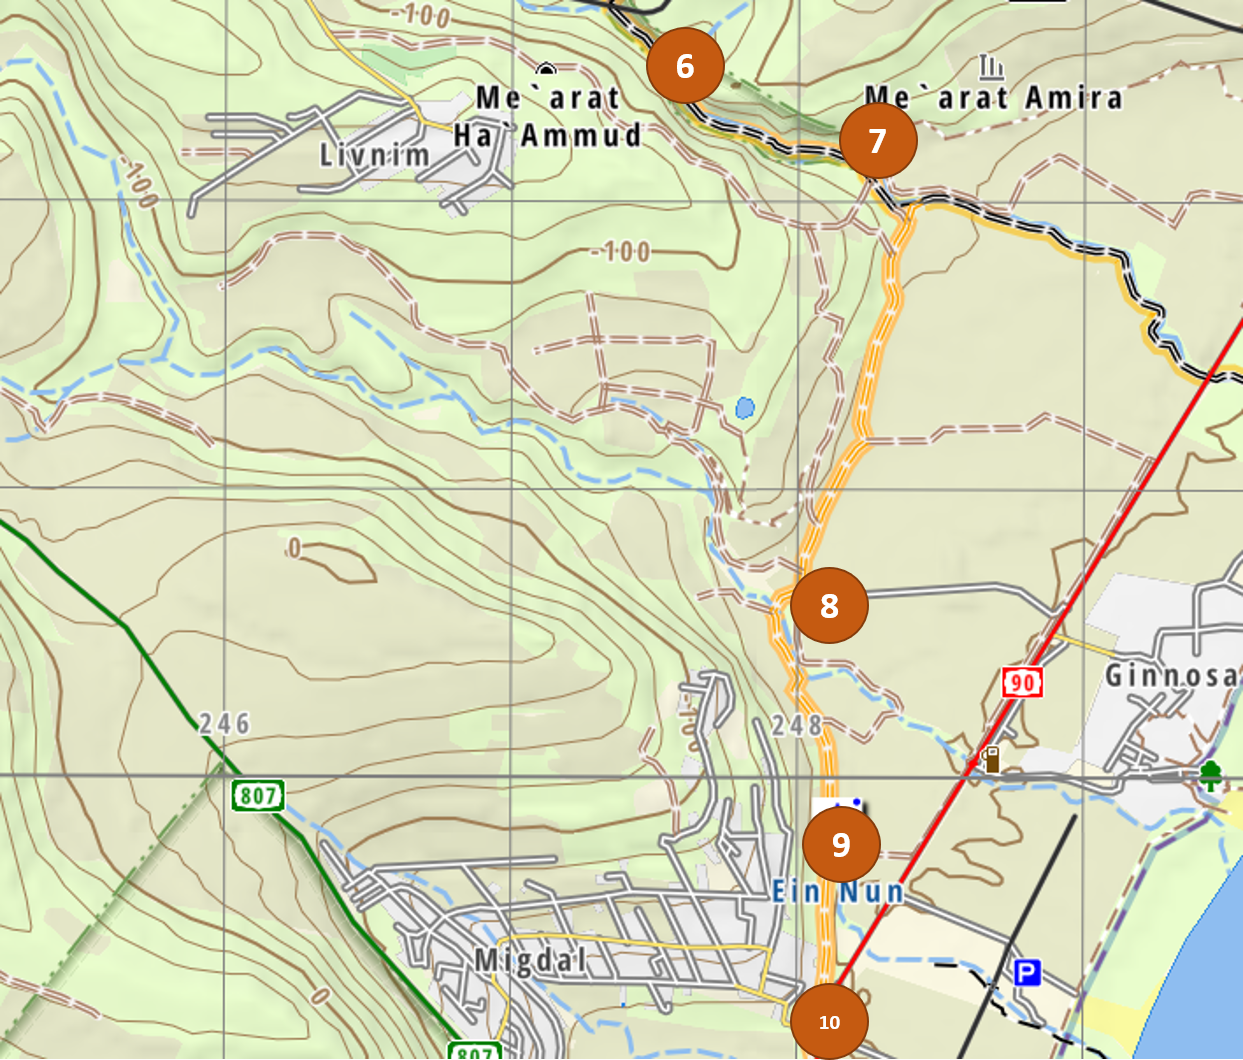 Lower Nahal Amud map on the Israel National Trail